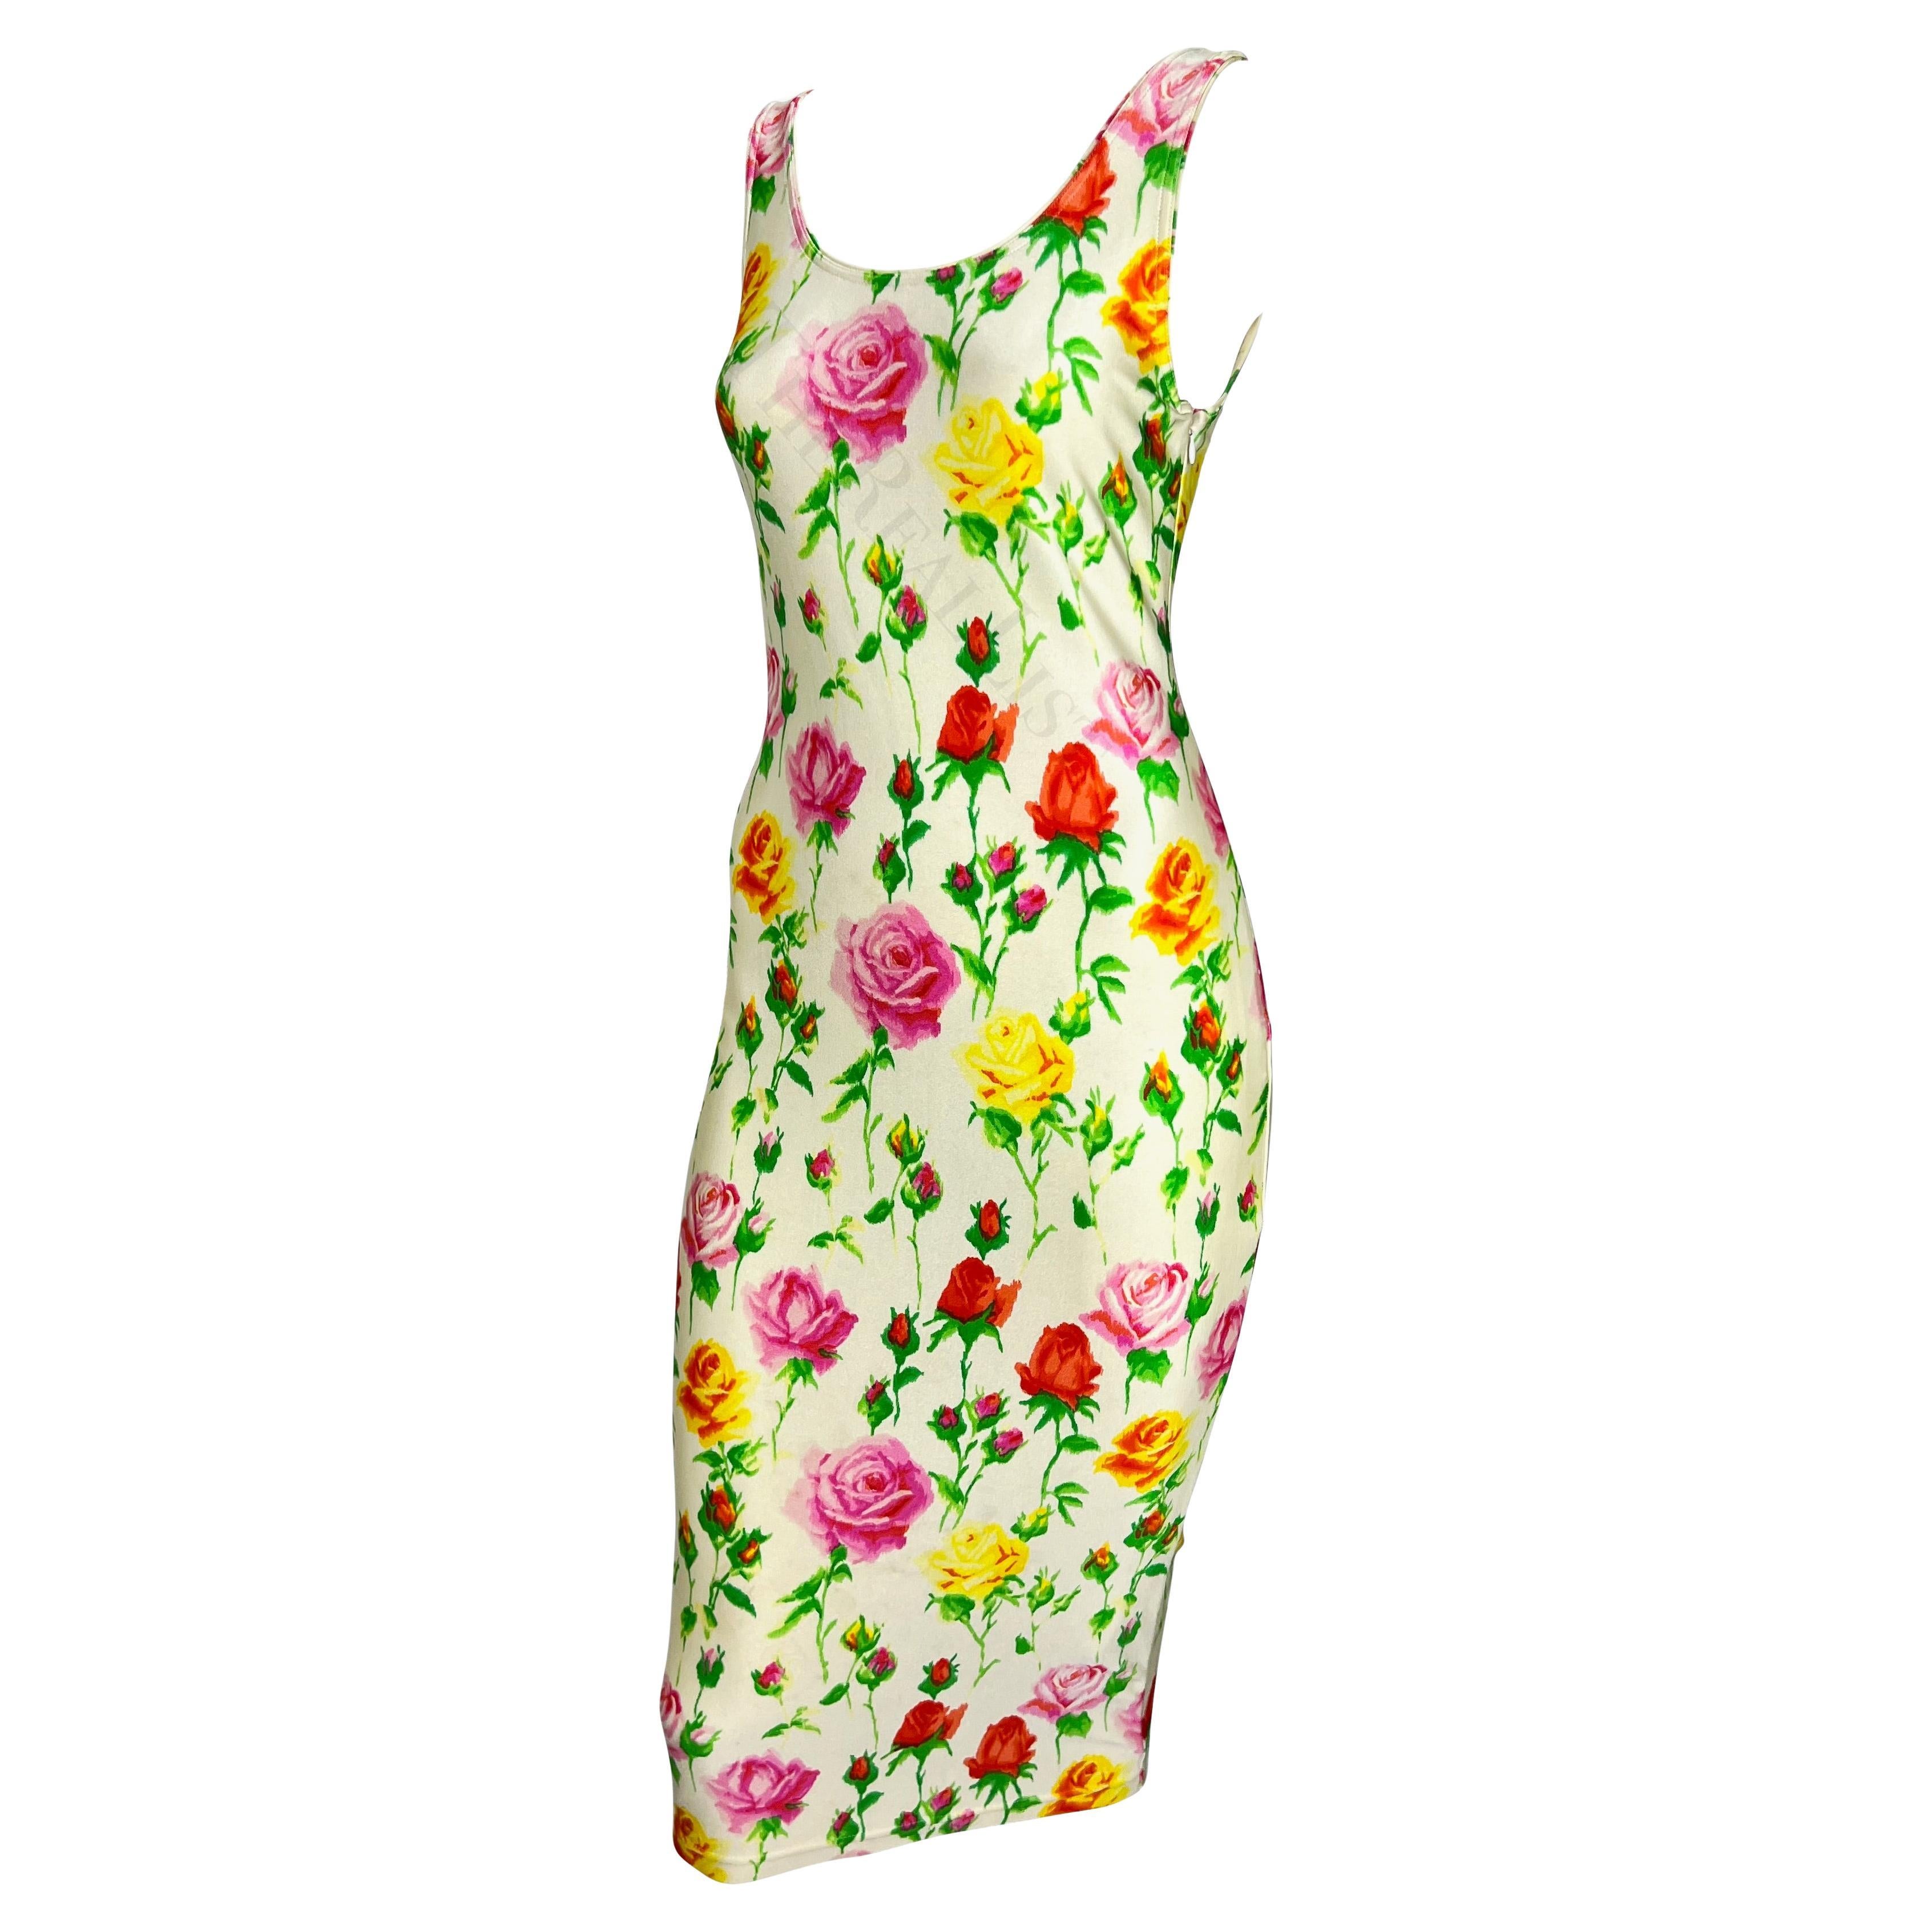 Women's S/S 1995 Gianni Versace Runway White Floral Rose Bodycon Dress For Sale